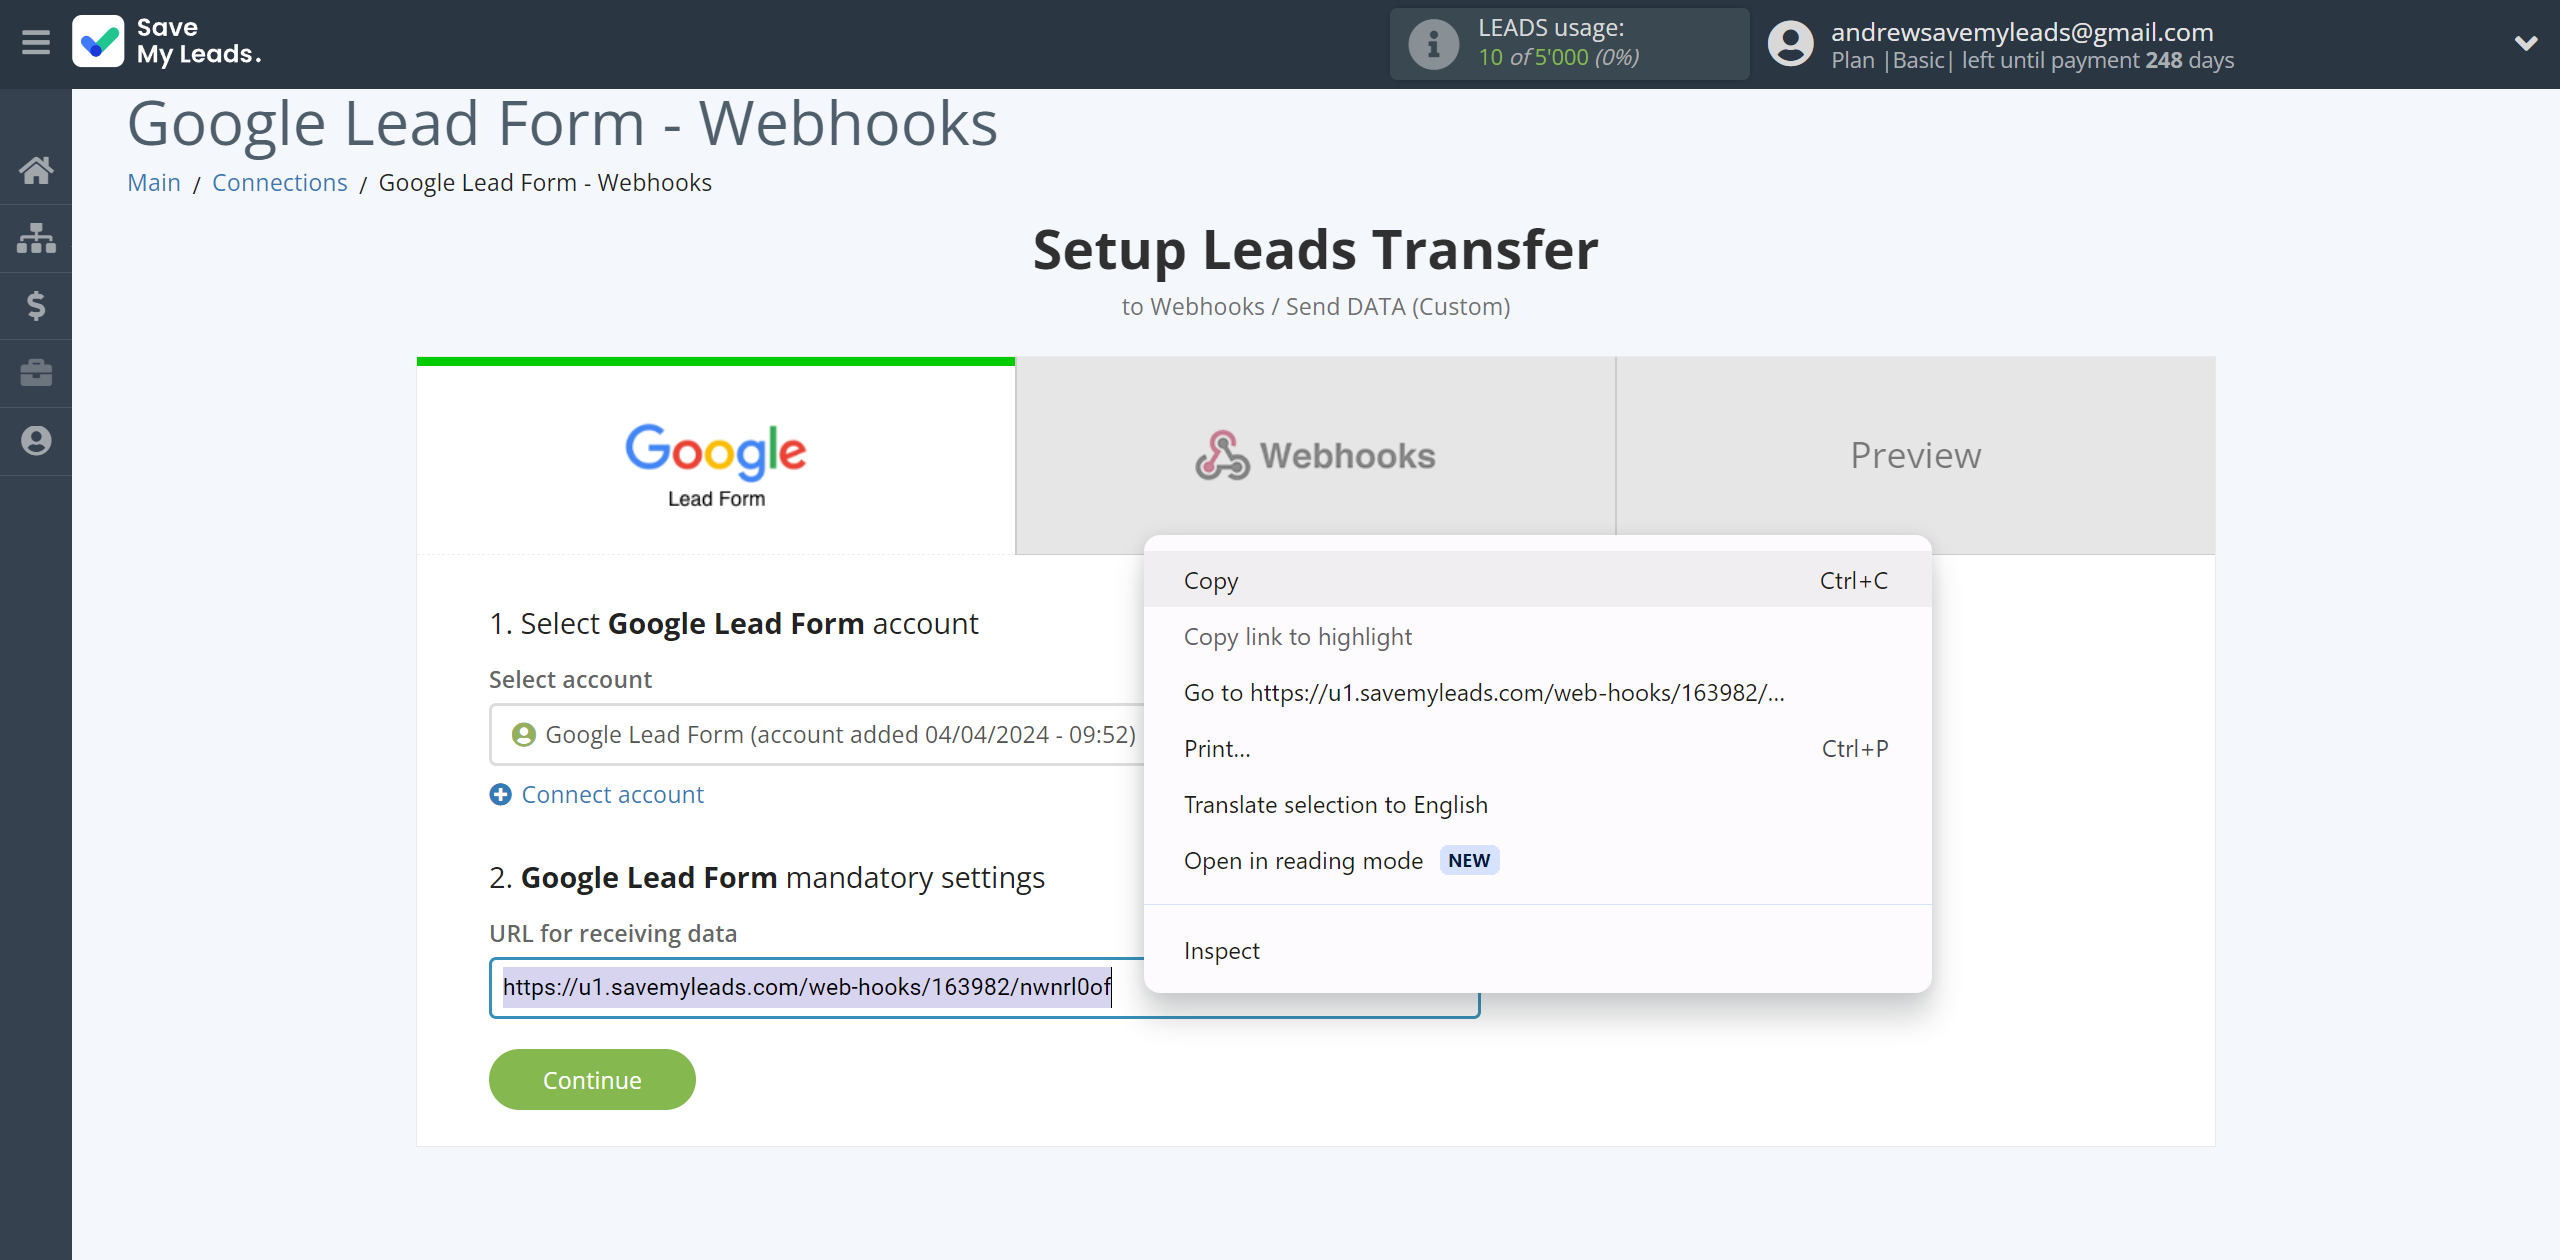 How to Connect Google Lead Form with Webhooks (Custom) | Data Source account connection